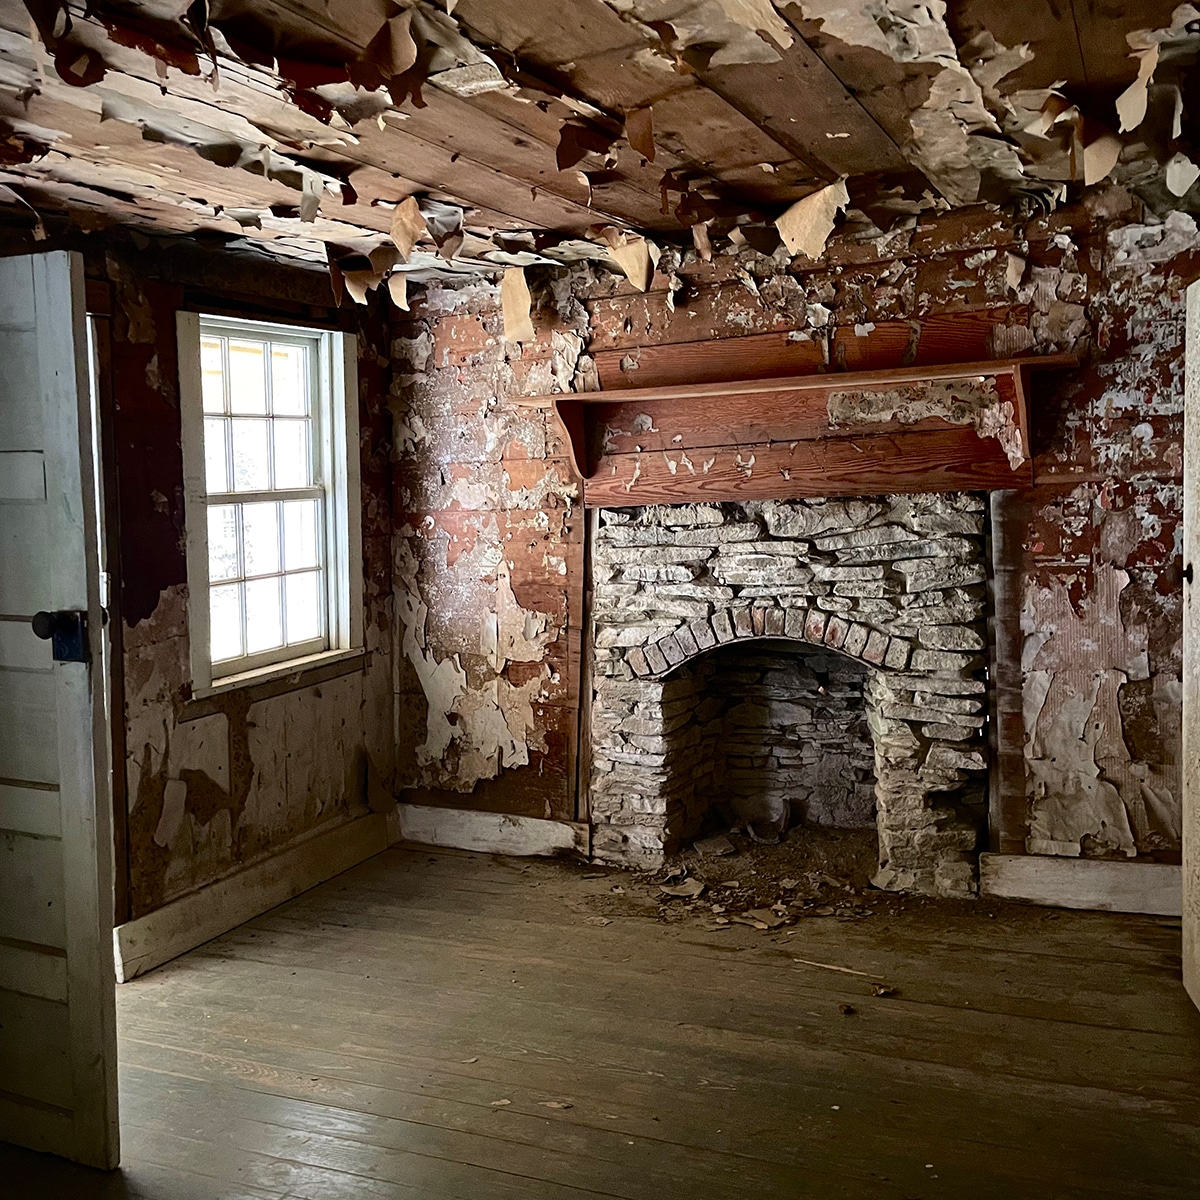 Inside the living room area of an old house in the Cataloochee valley that was built in the late 1800s.